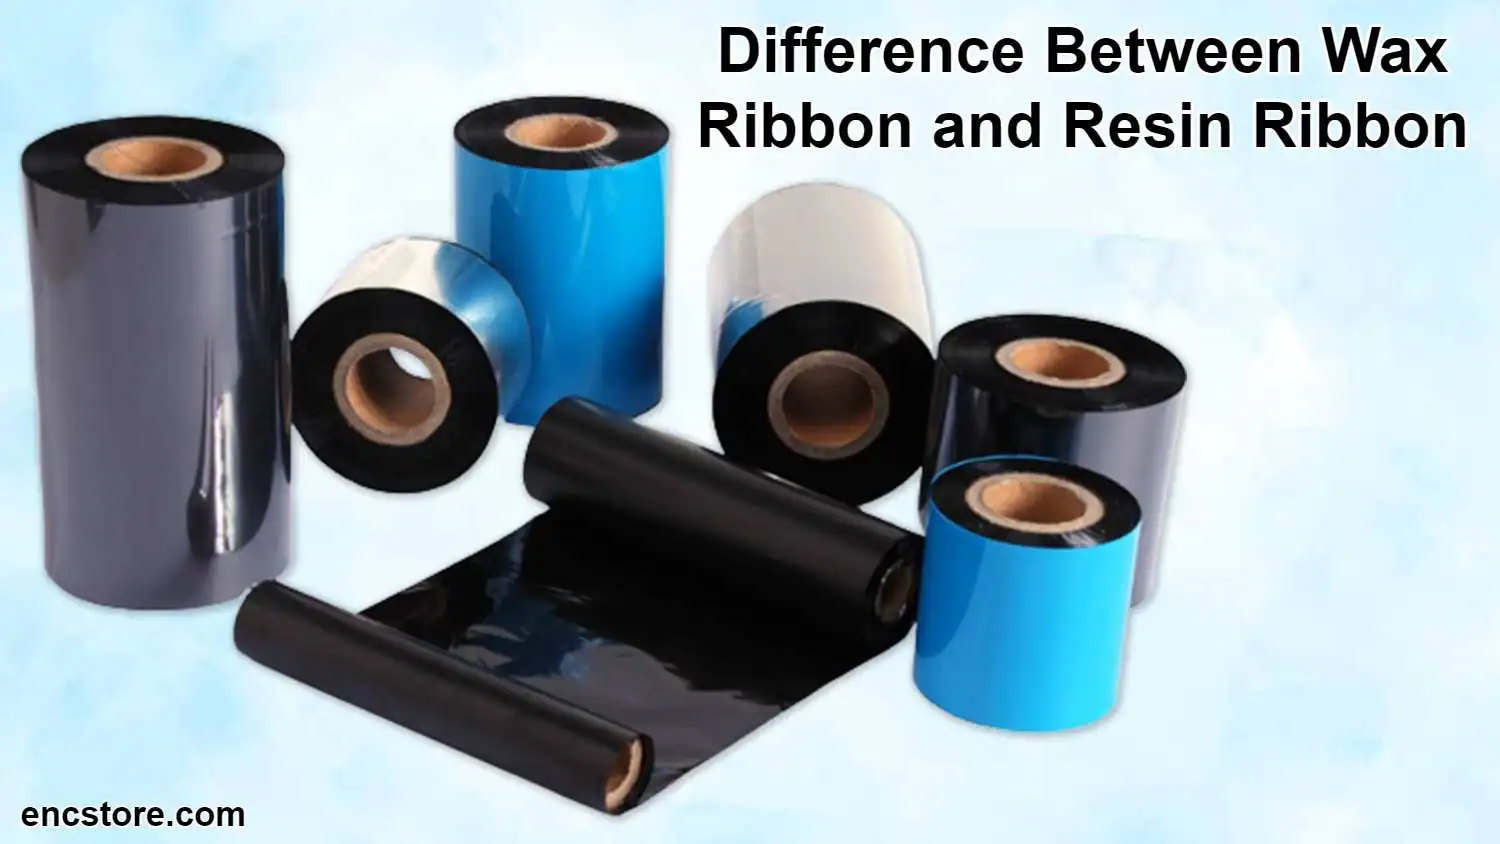 Difference Between Wax and Resin Ribbons